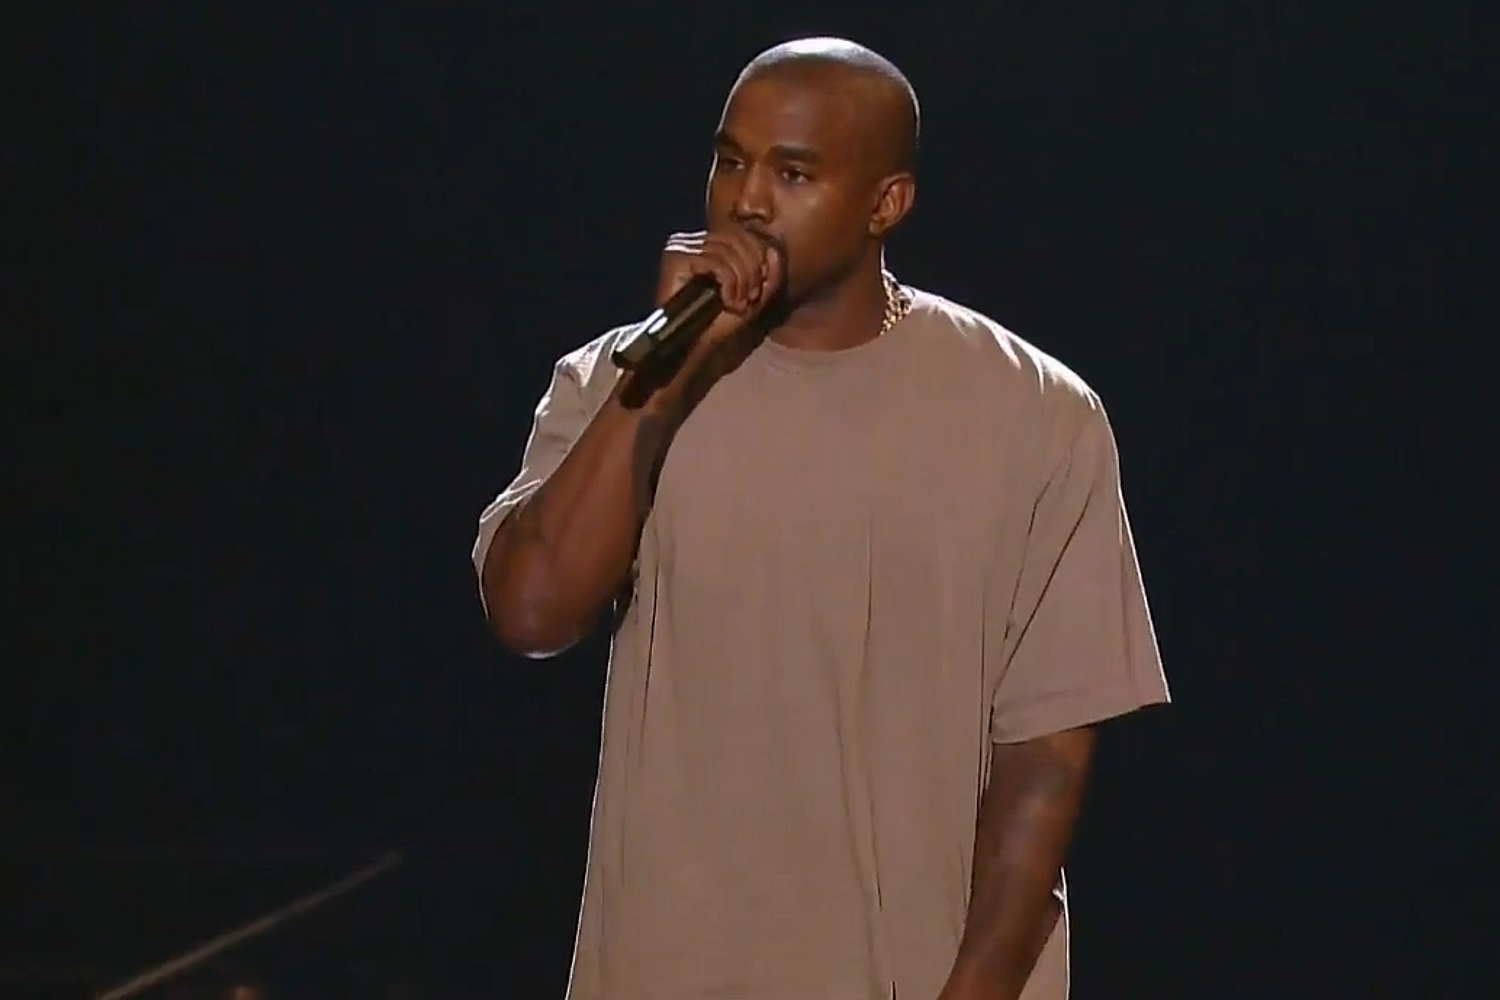 Kanye West nearly performed at the VMAs this weekend